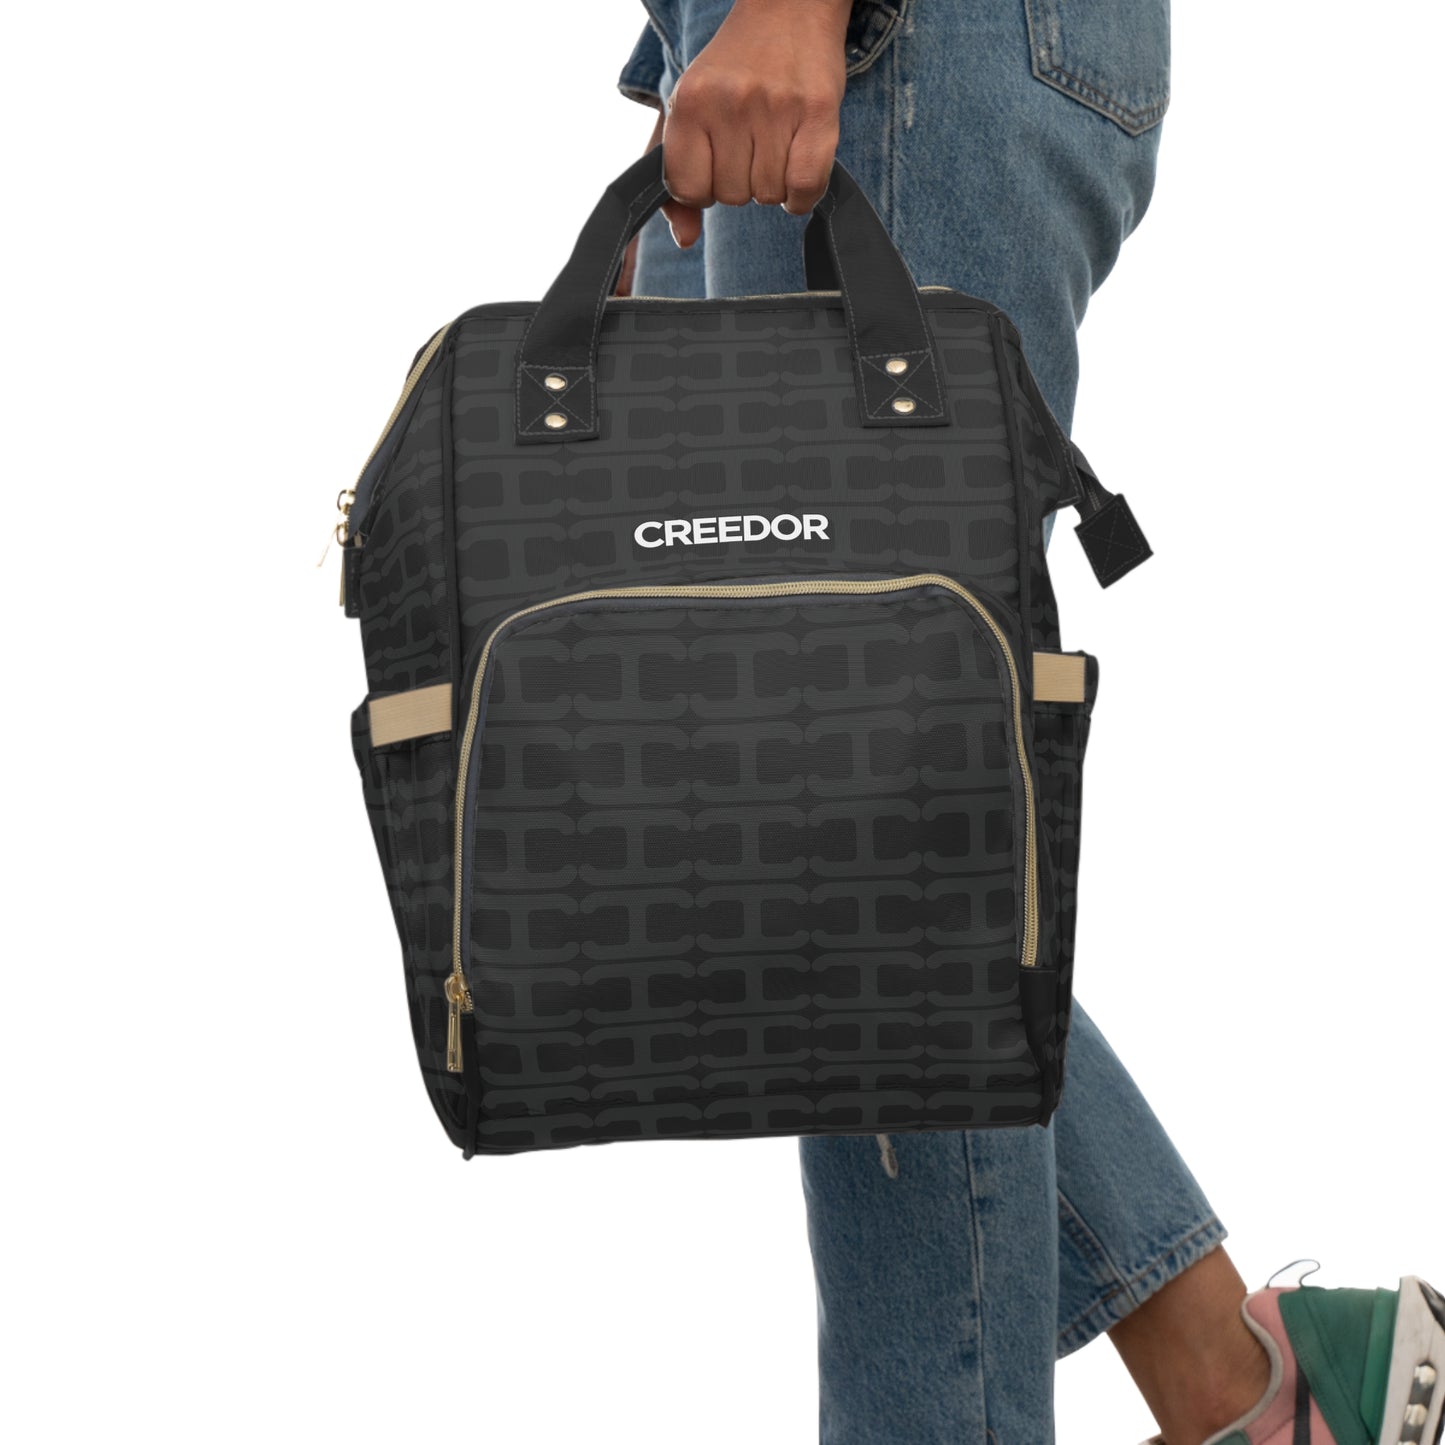 Must-Have CREEDOR Diaper Backpack